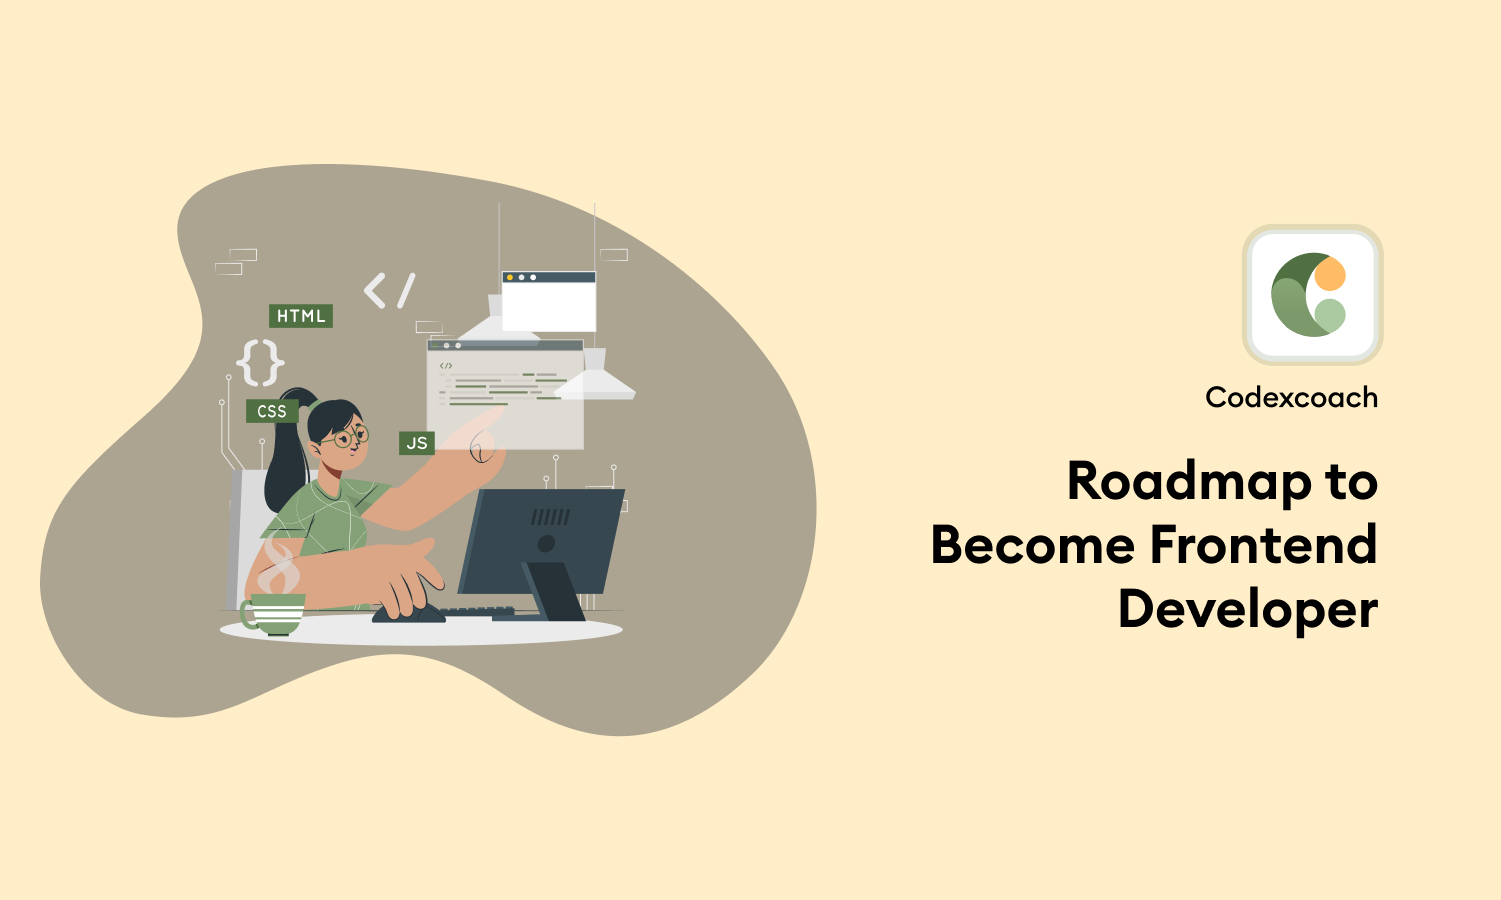 Roadmap to Become Frontend Developer